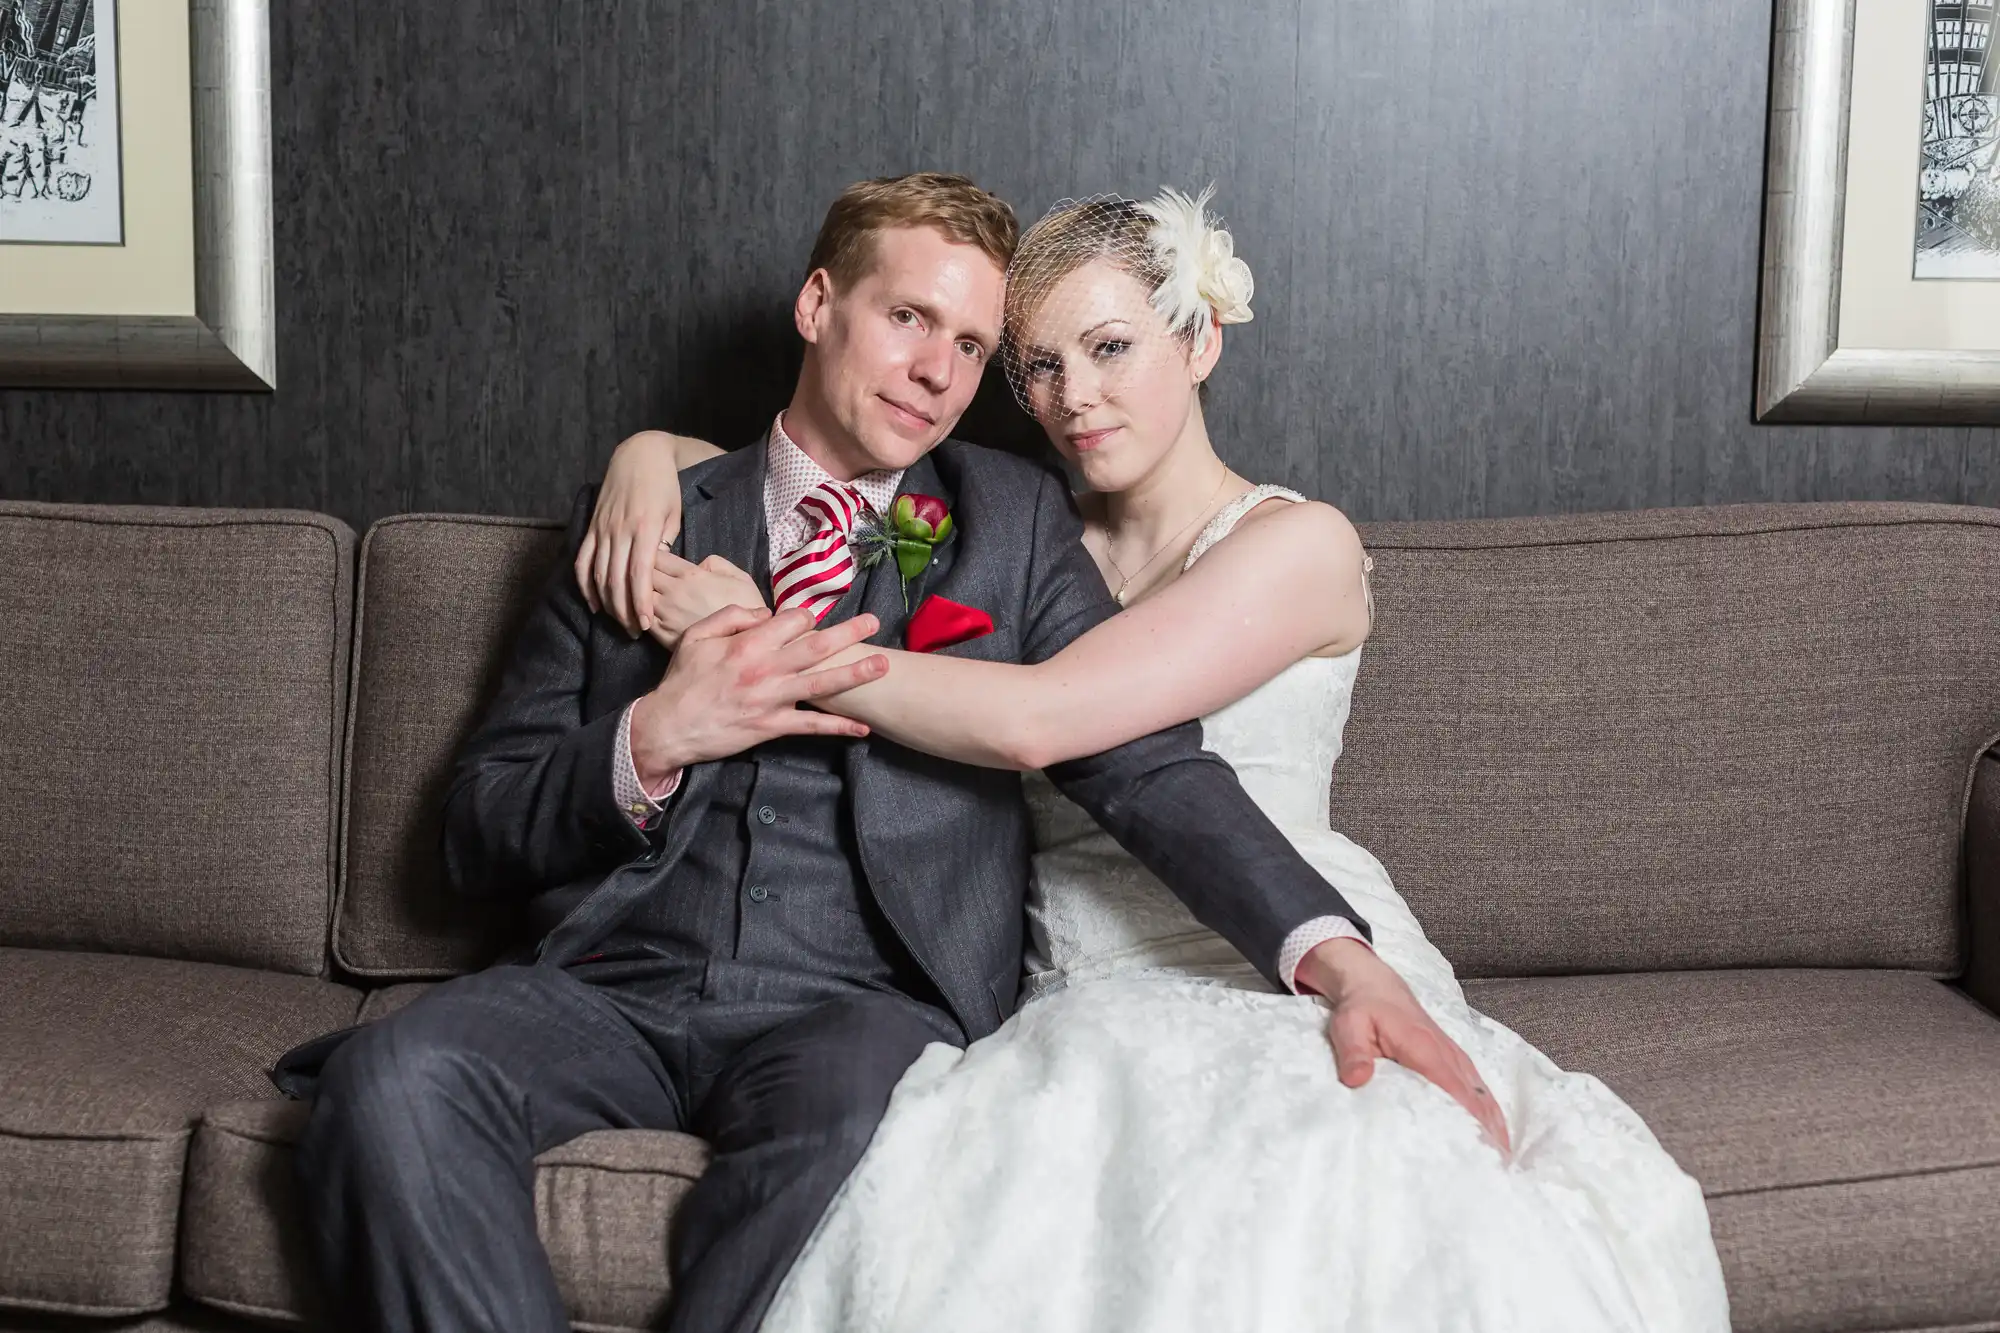 A newlywed couple embracing on a sofa, the groom in a dark suit and the bride in a white gown, both looking directly at the camera.